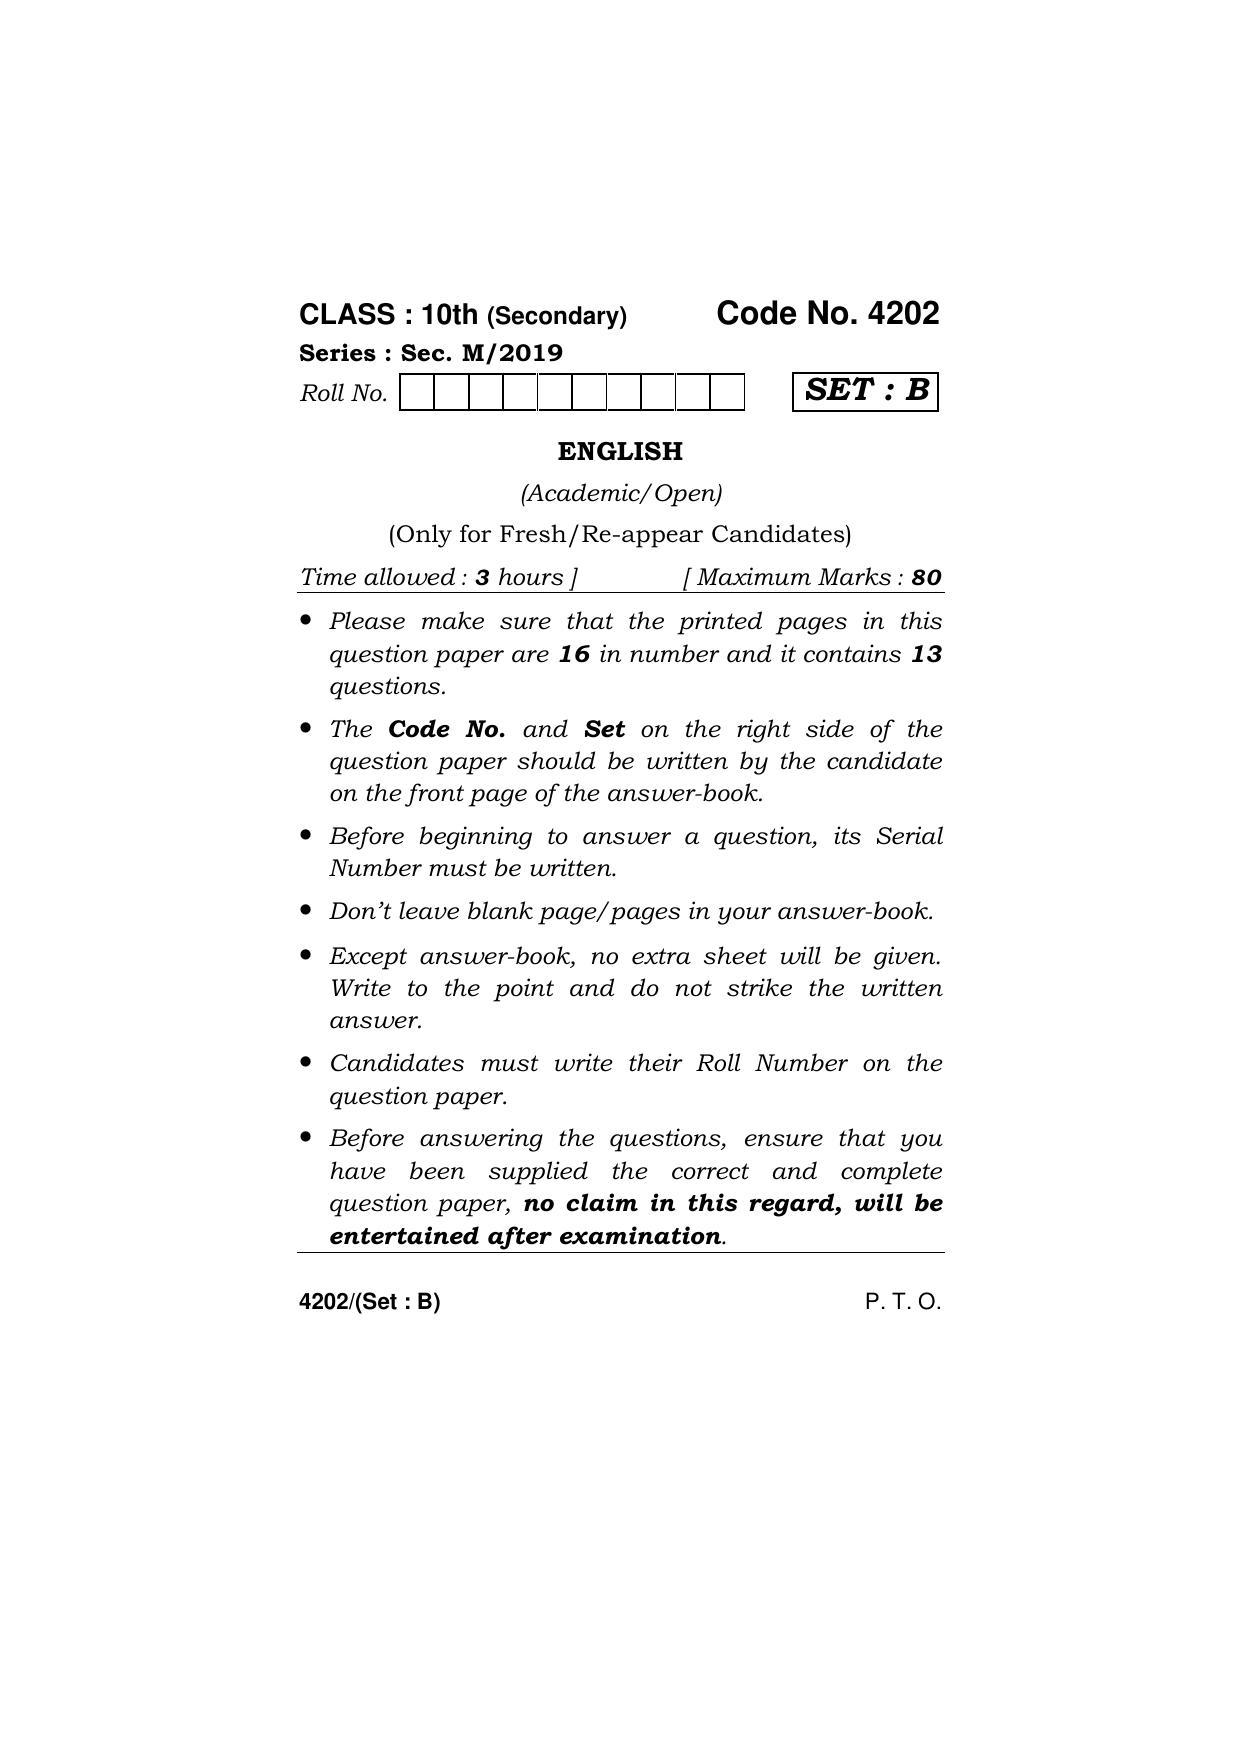 Haryana Board HBSE Class 10 English (All Set) 2019 Question Paper - Page 17